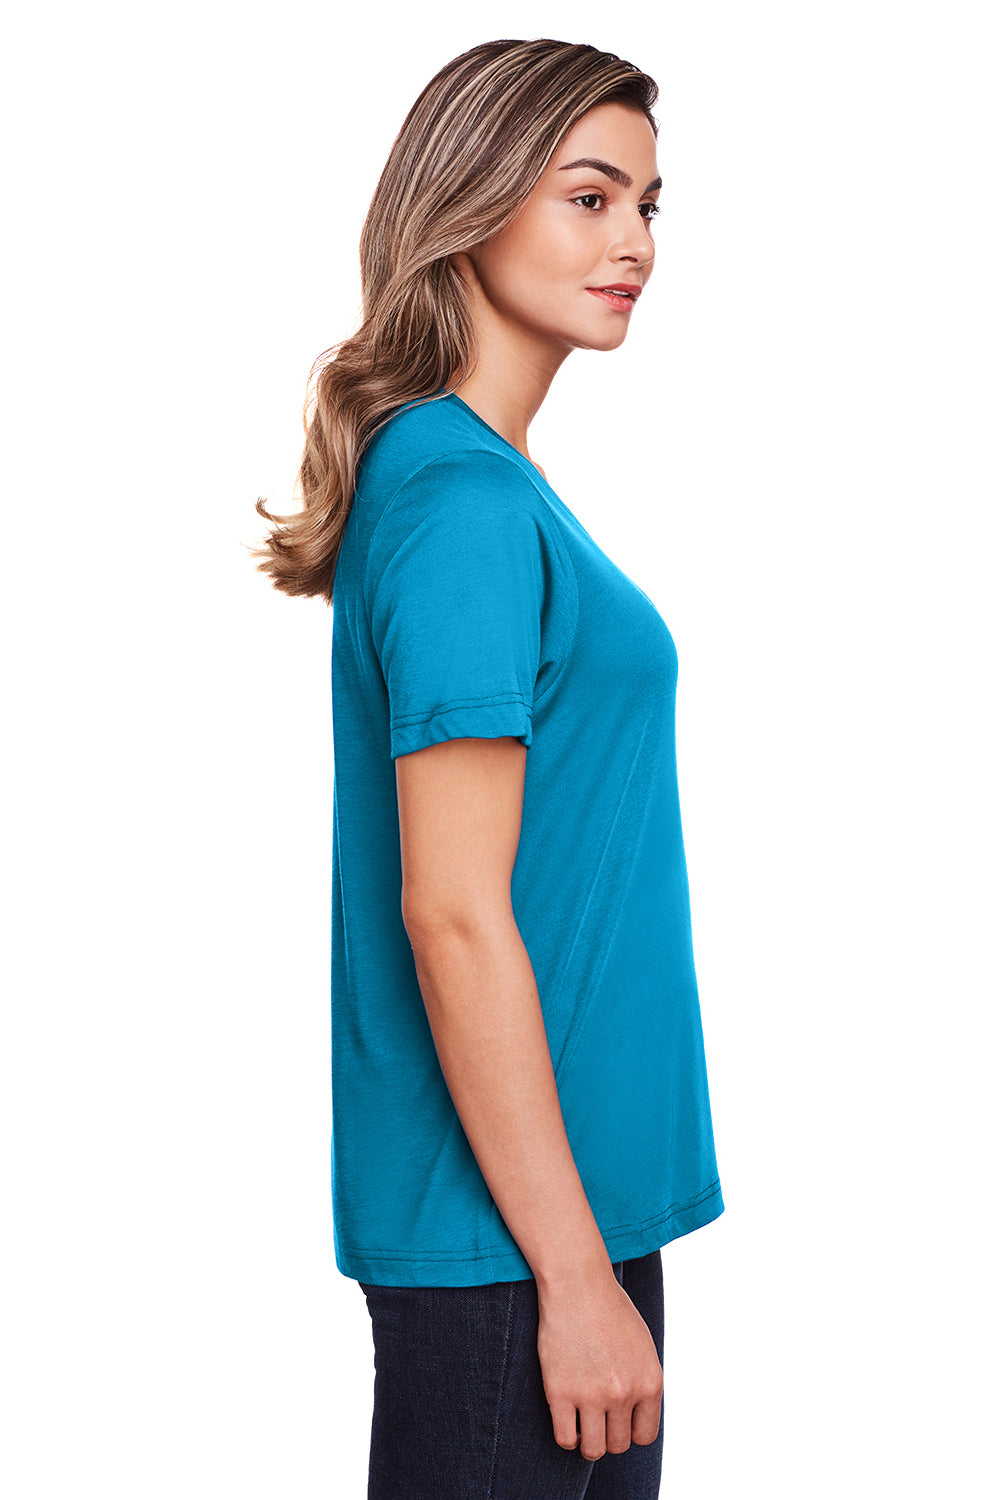 Core 365 CE111W Womens Fusion ChromaSoft Performance Moisture Wicking Short Sleeve Scoop Neck T-Shirt Electric Blue Side